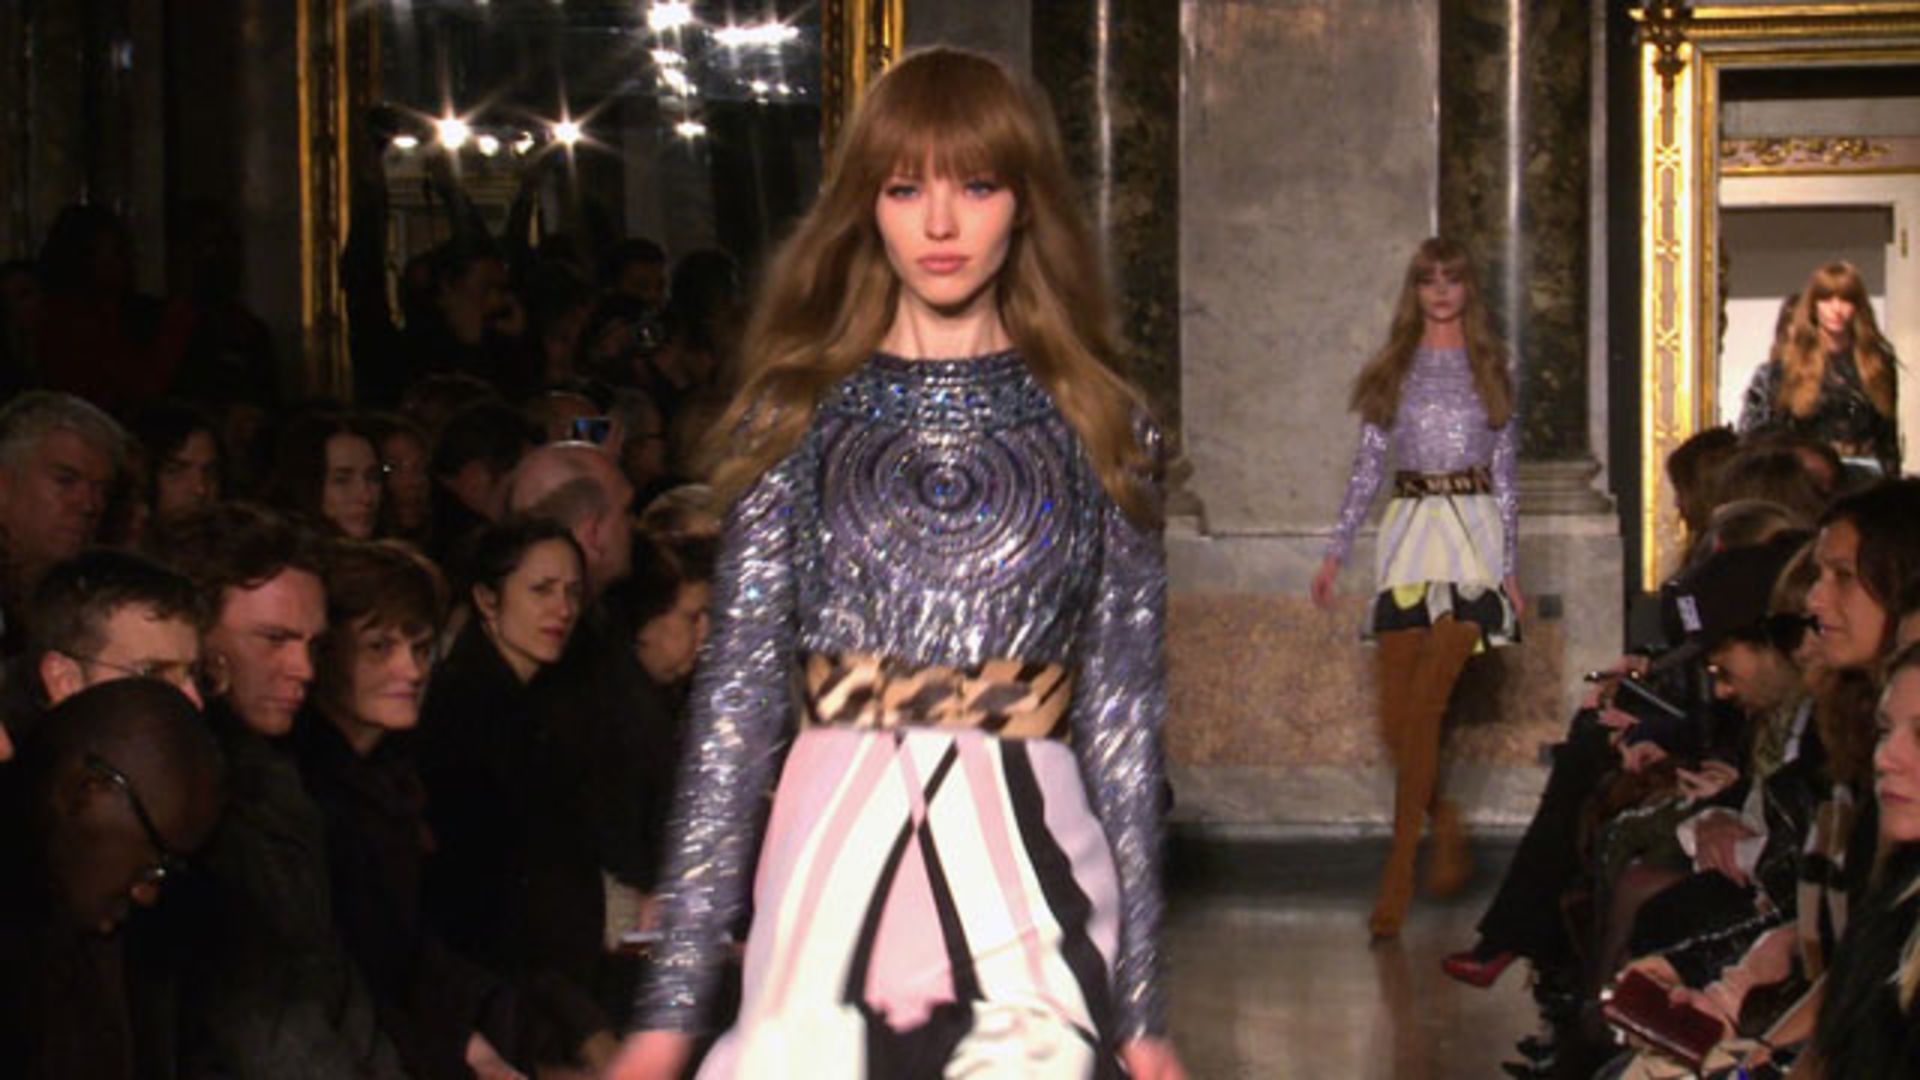 Emilio Pucci's Next Fashion Show Will Be in Its Hometown of